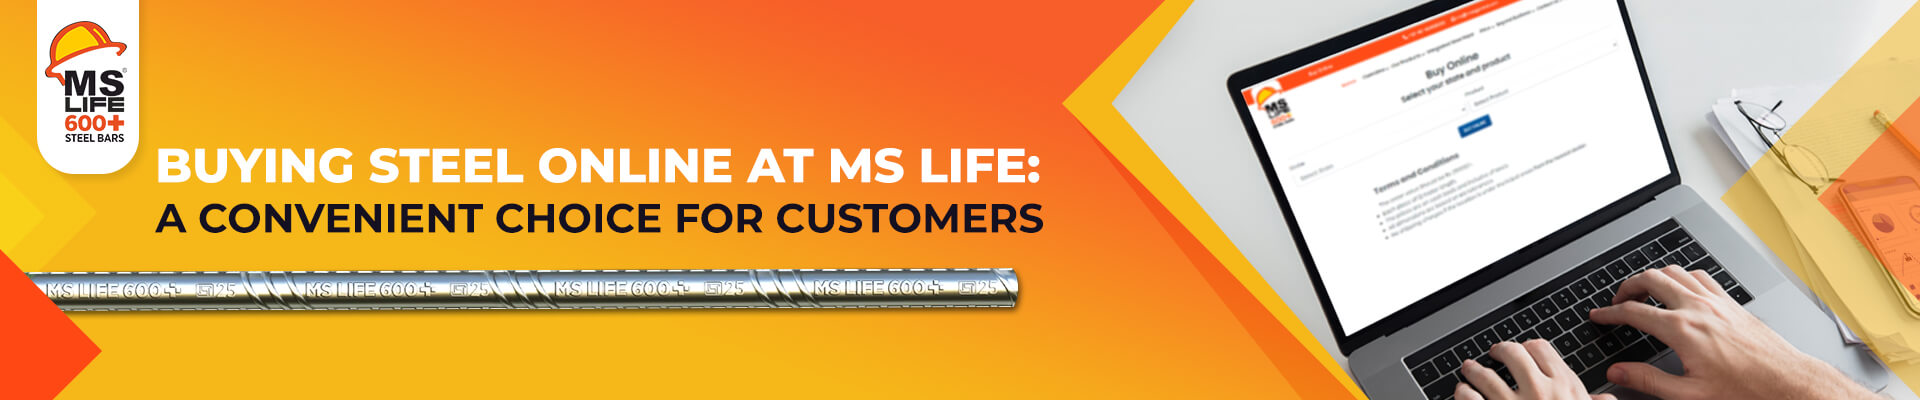 Buying Steel Online at MS Life: A Convenient Choice for Customers